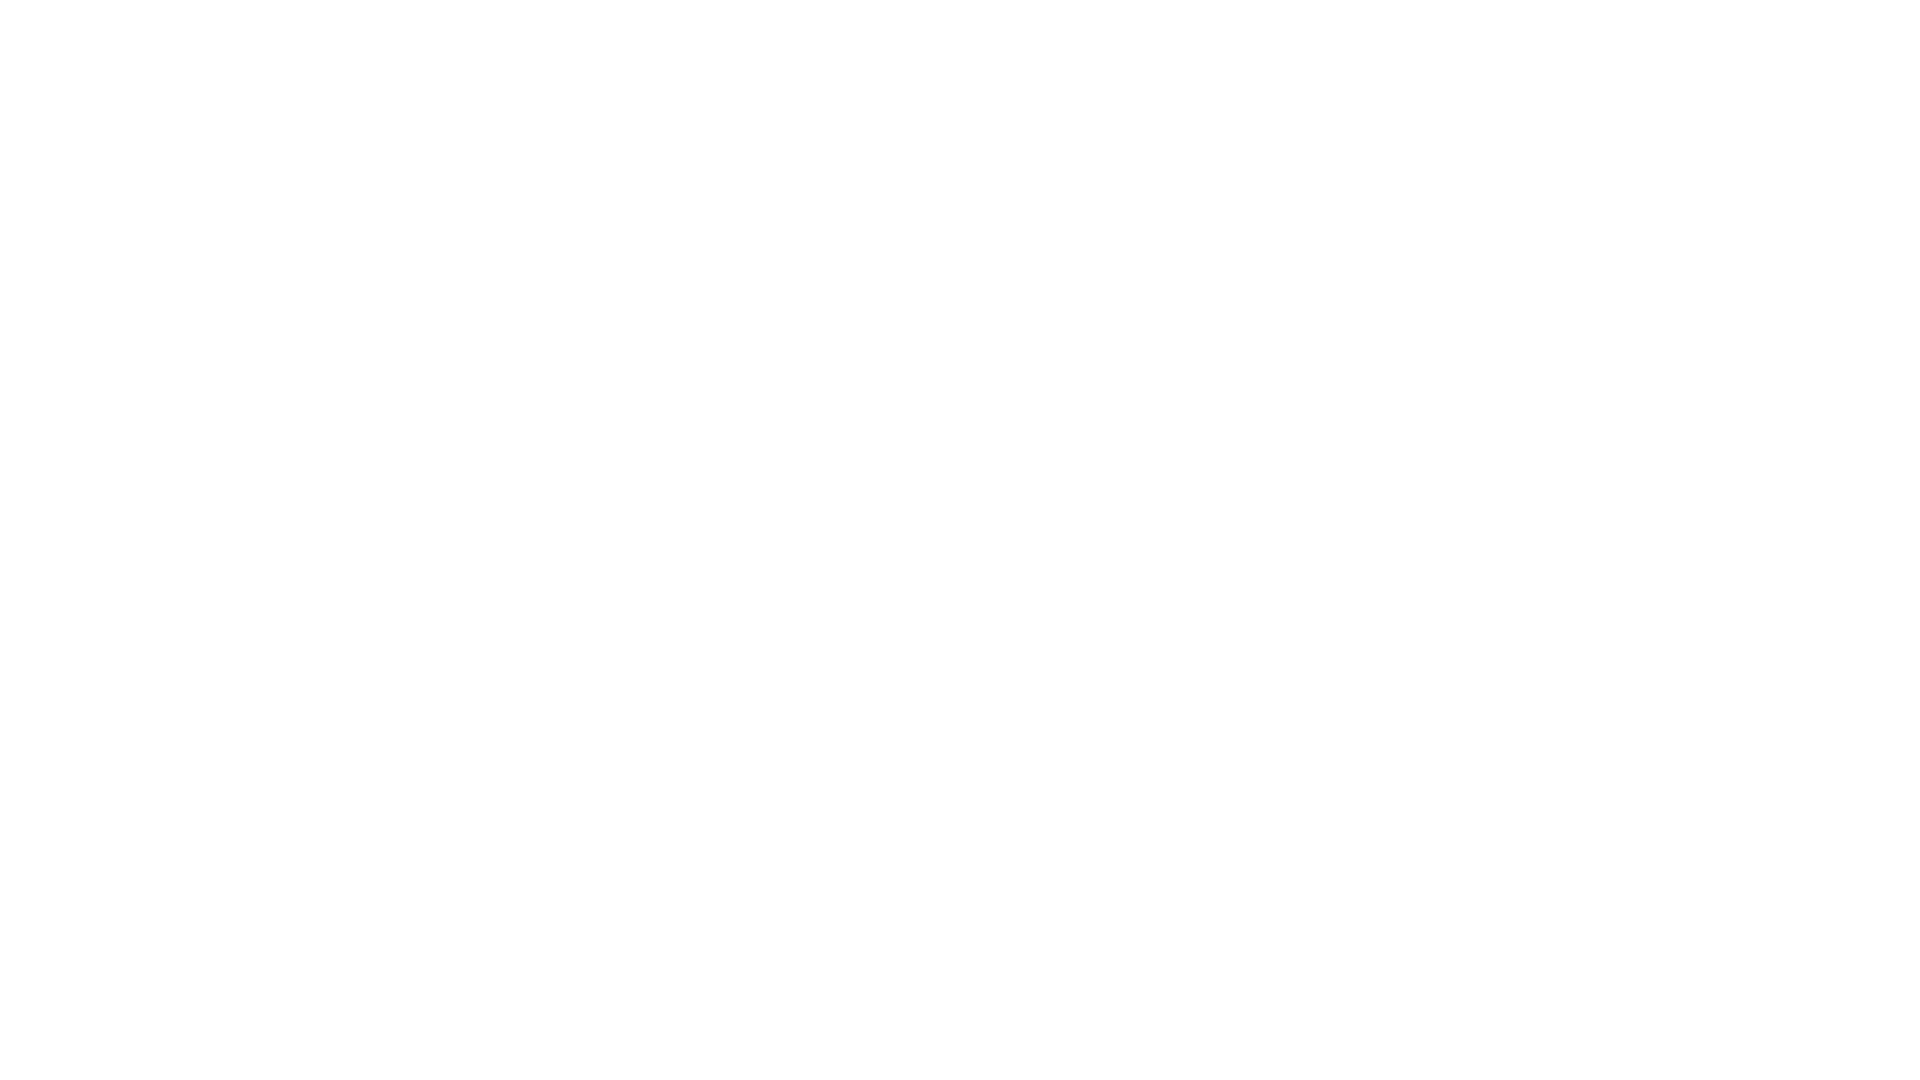 Clevr-Image-1920x1080px-lines-1@2x